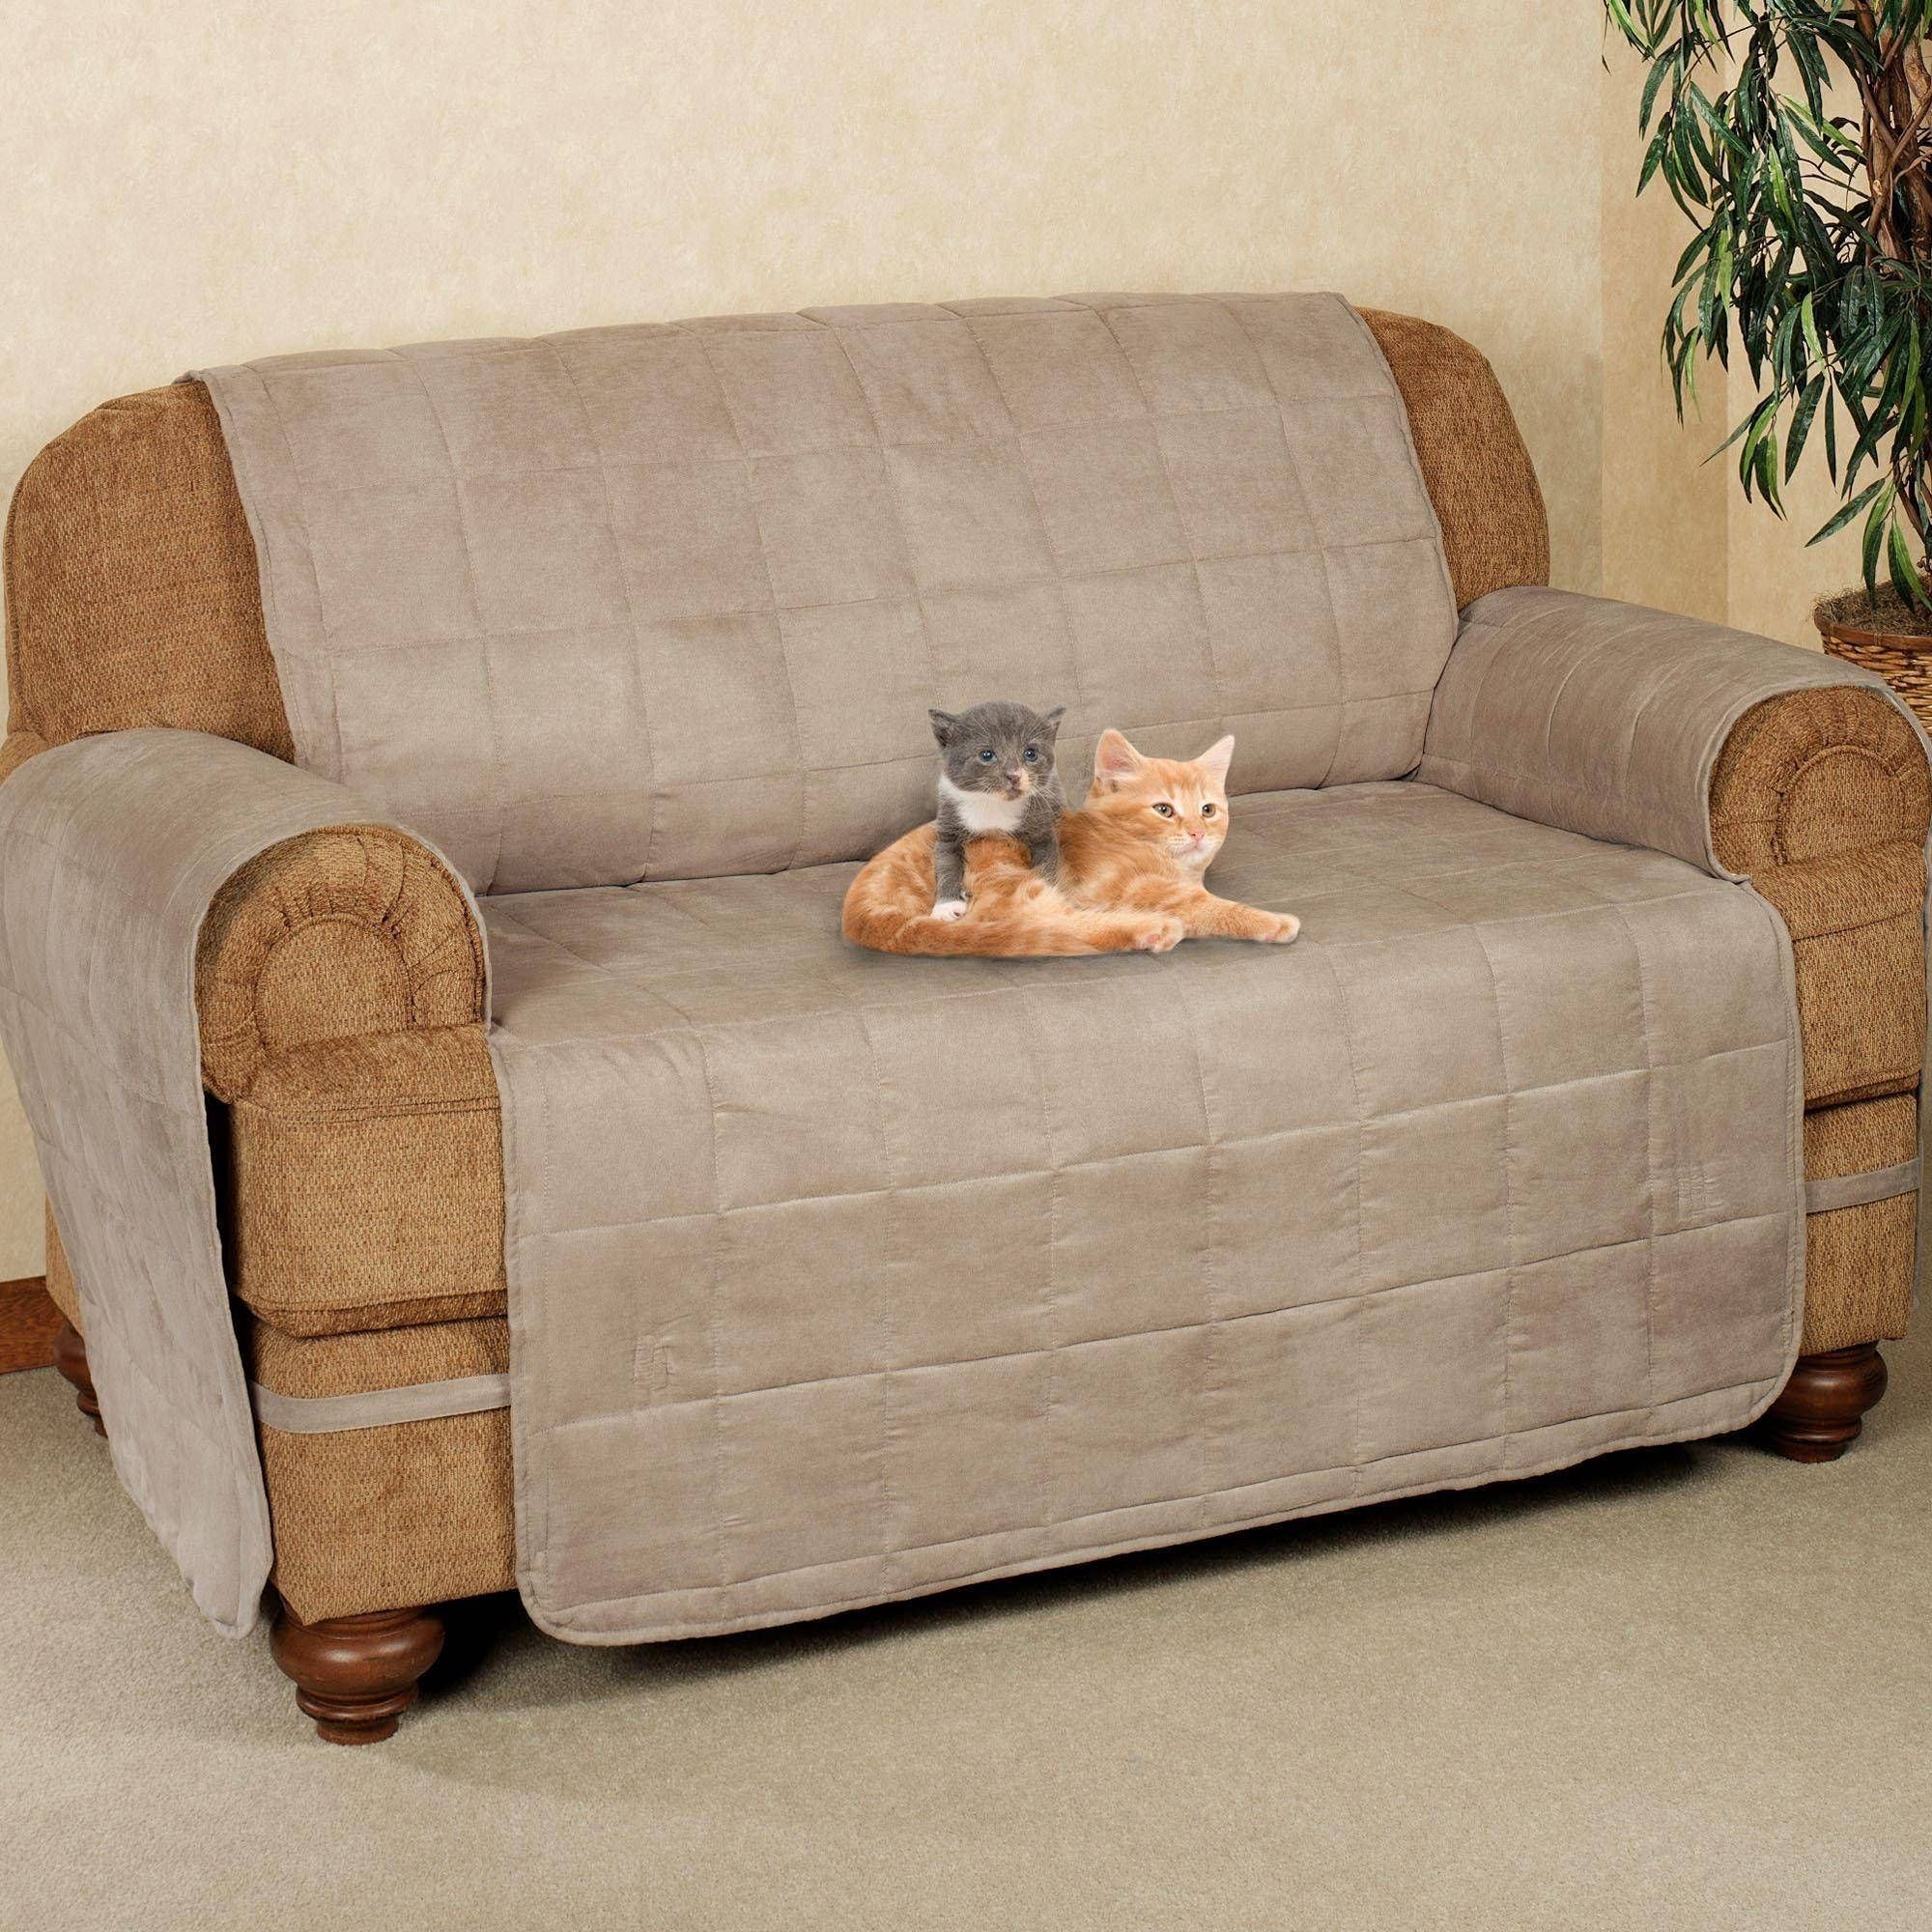 20 Collection Of Pet Proof Sofa Covers | Sofa Ideas Within Cat Proof Sofas (View 12 of 15)